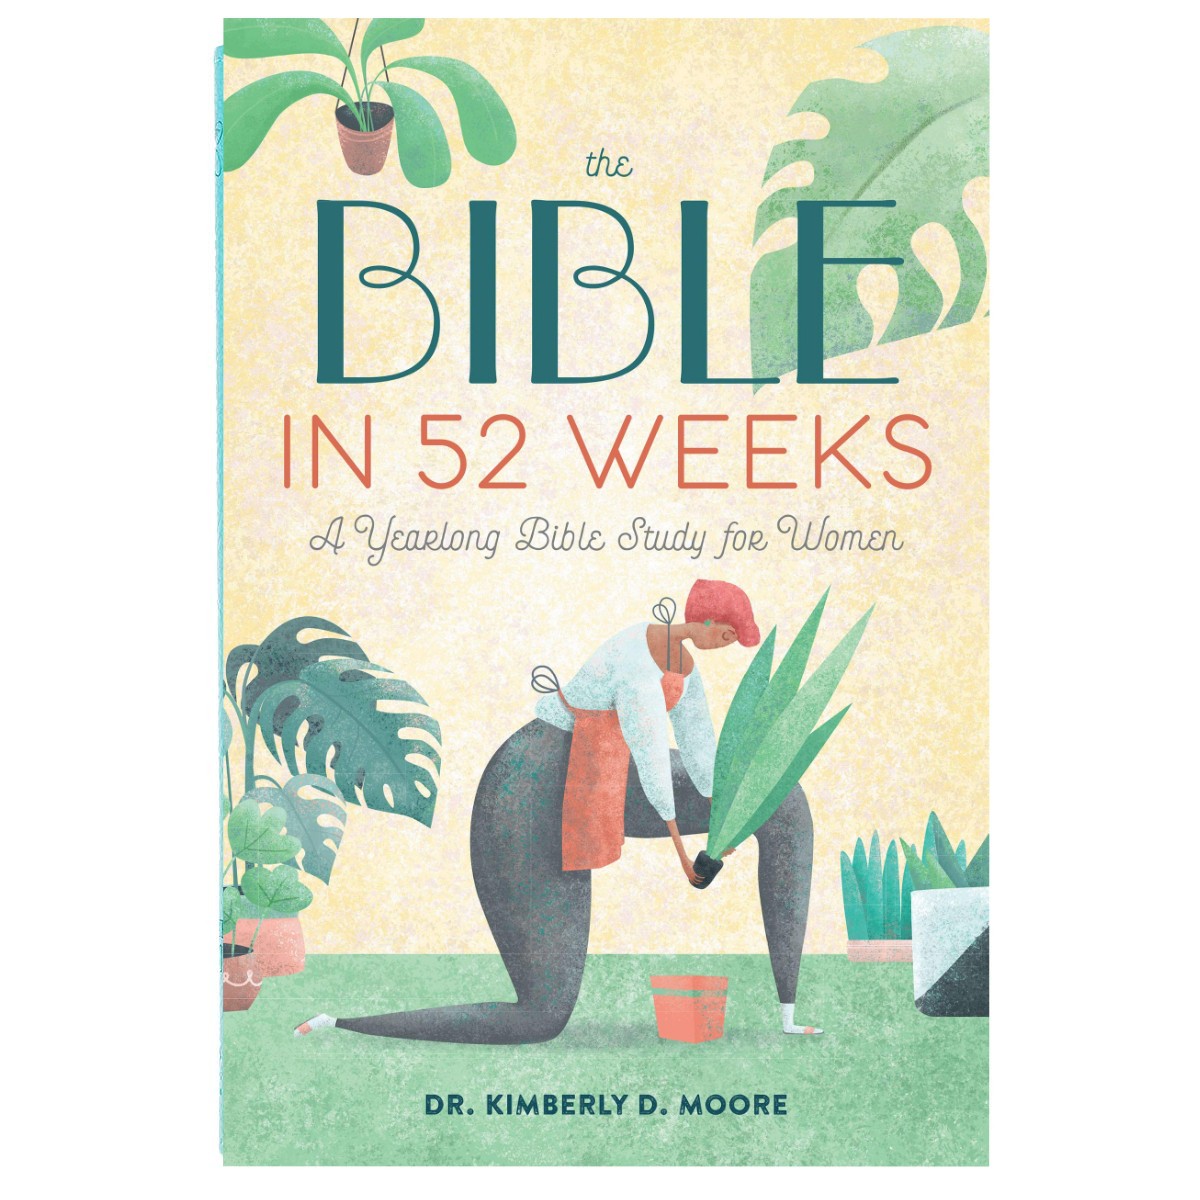 For Her. Bible Study - The Bible in 52 Weeks